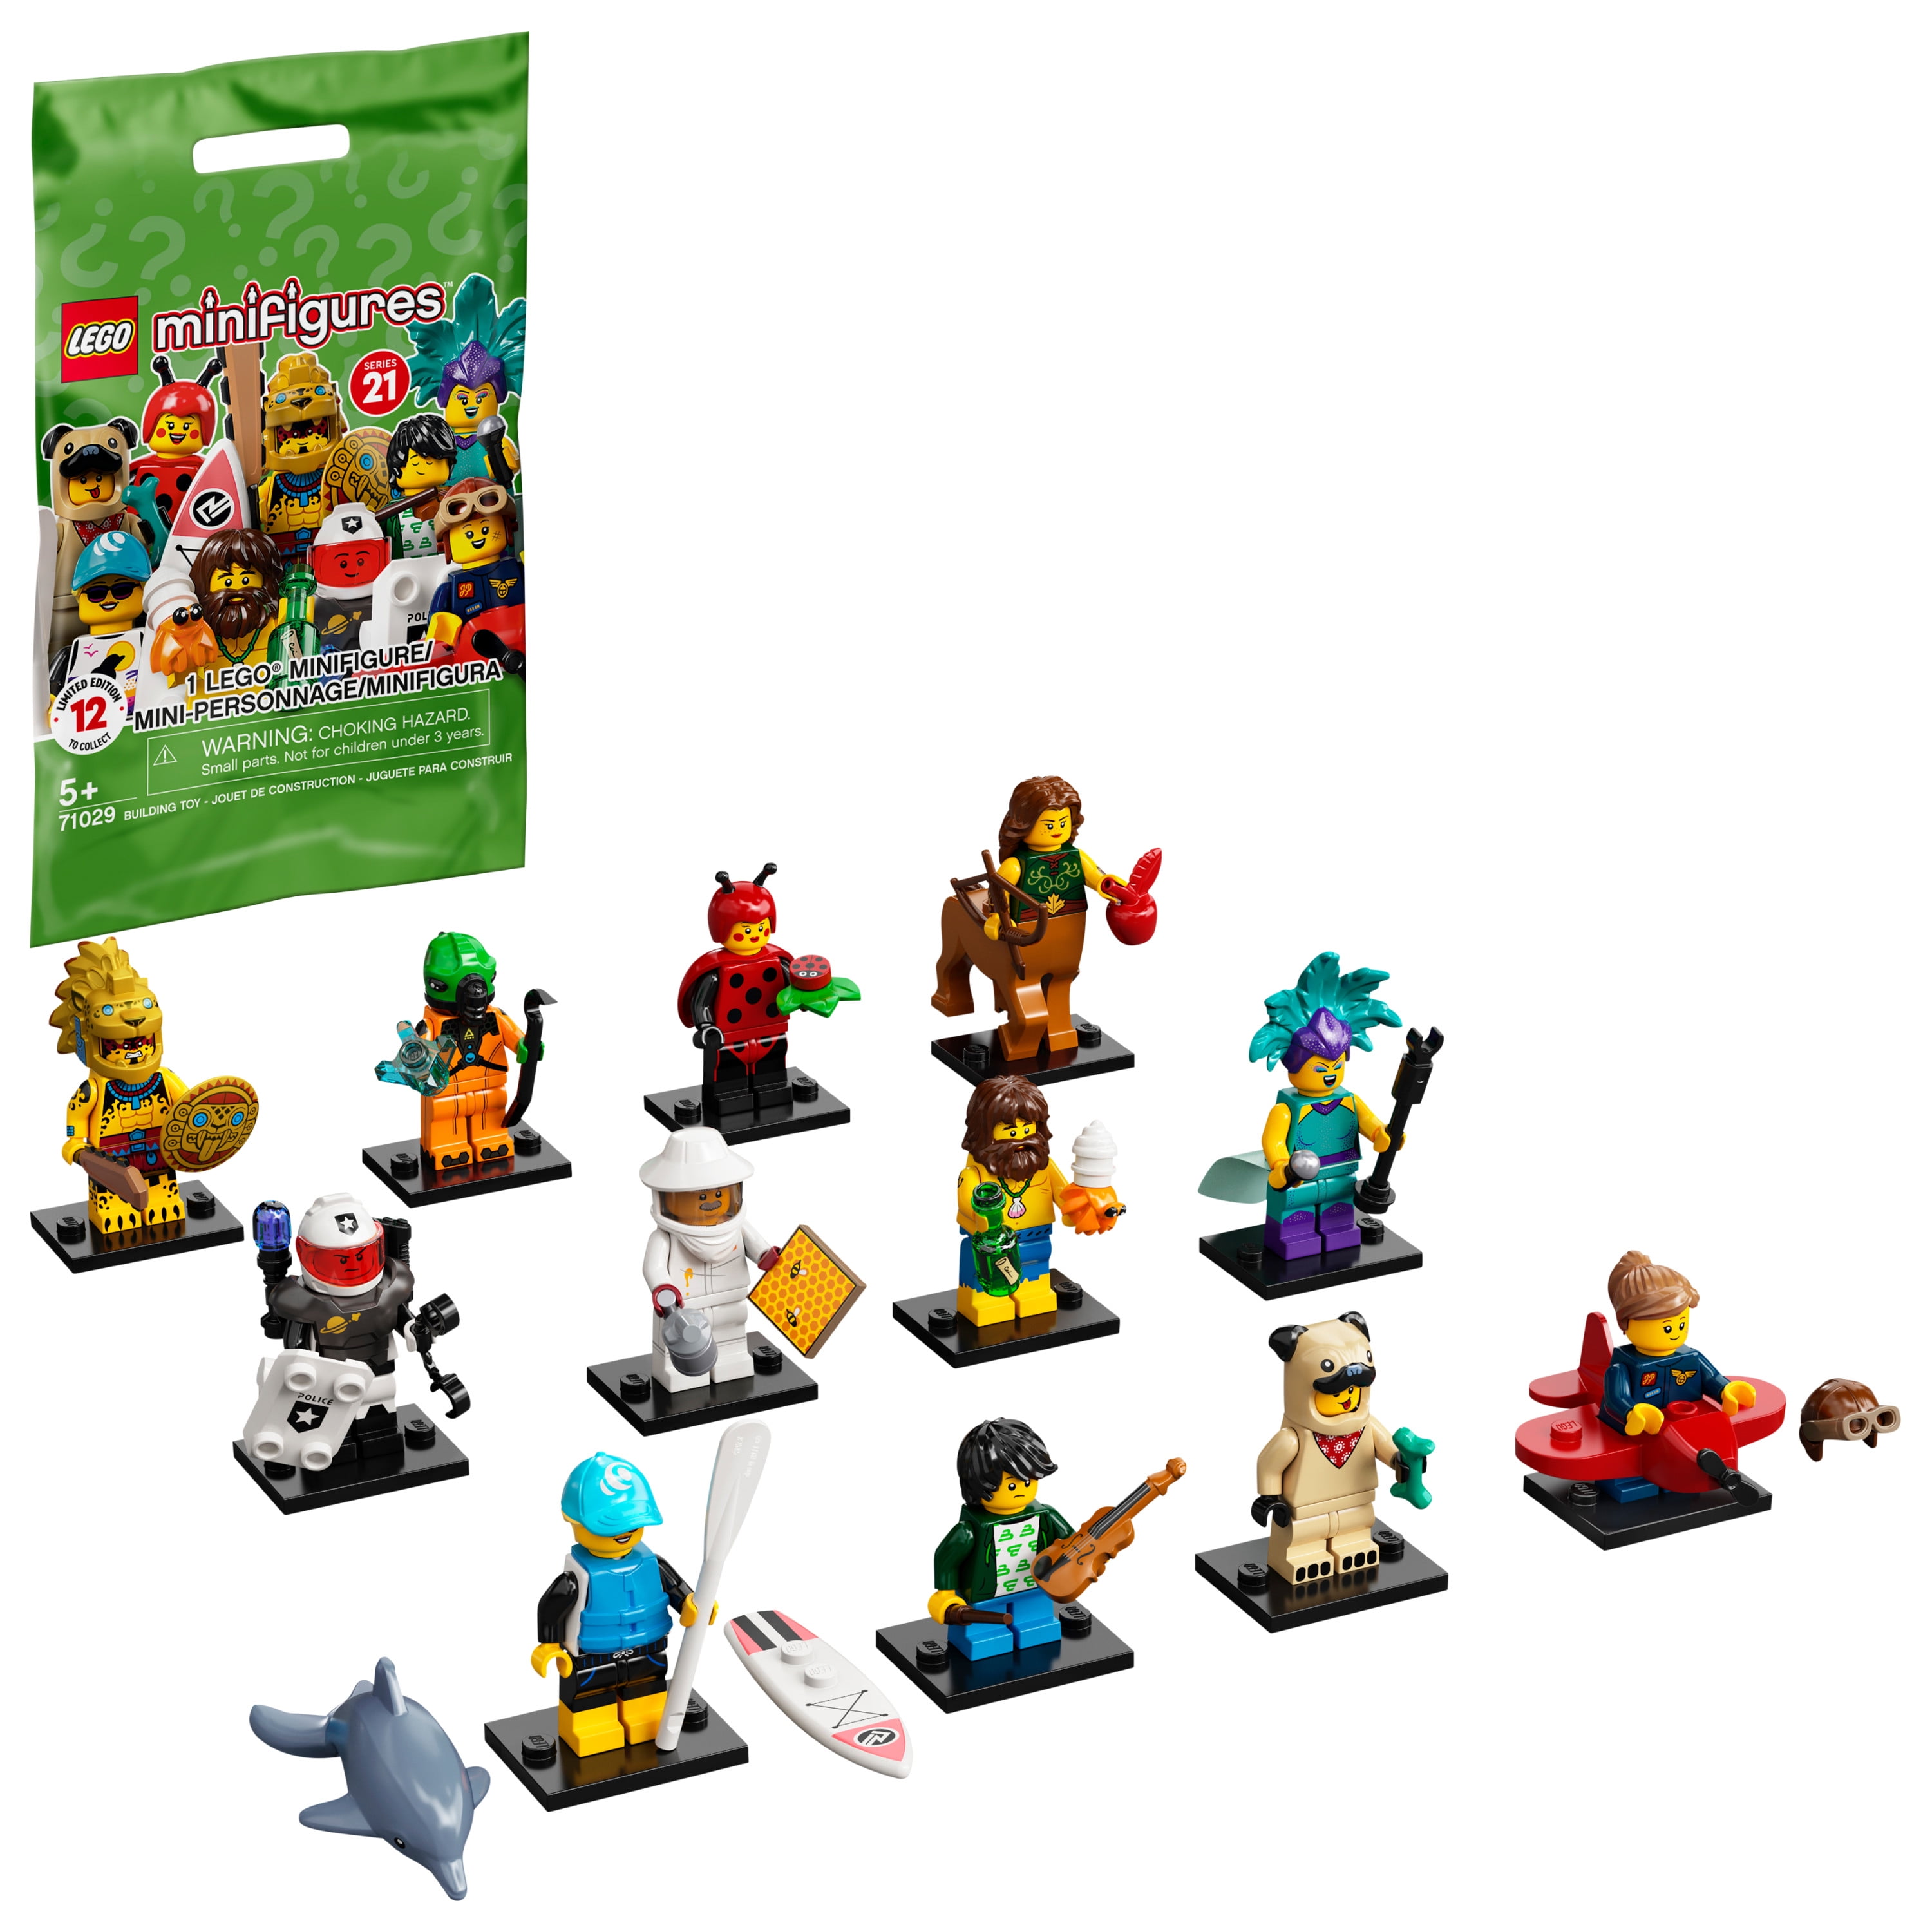 LEGO Minifigures Series 21 71029 Limited Edition Building Kit 1 of 12 to Collect for sale online